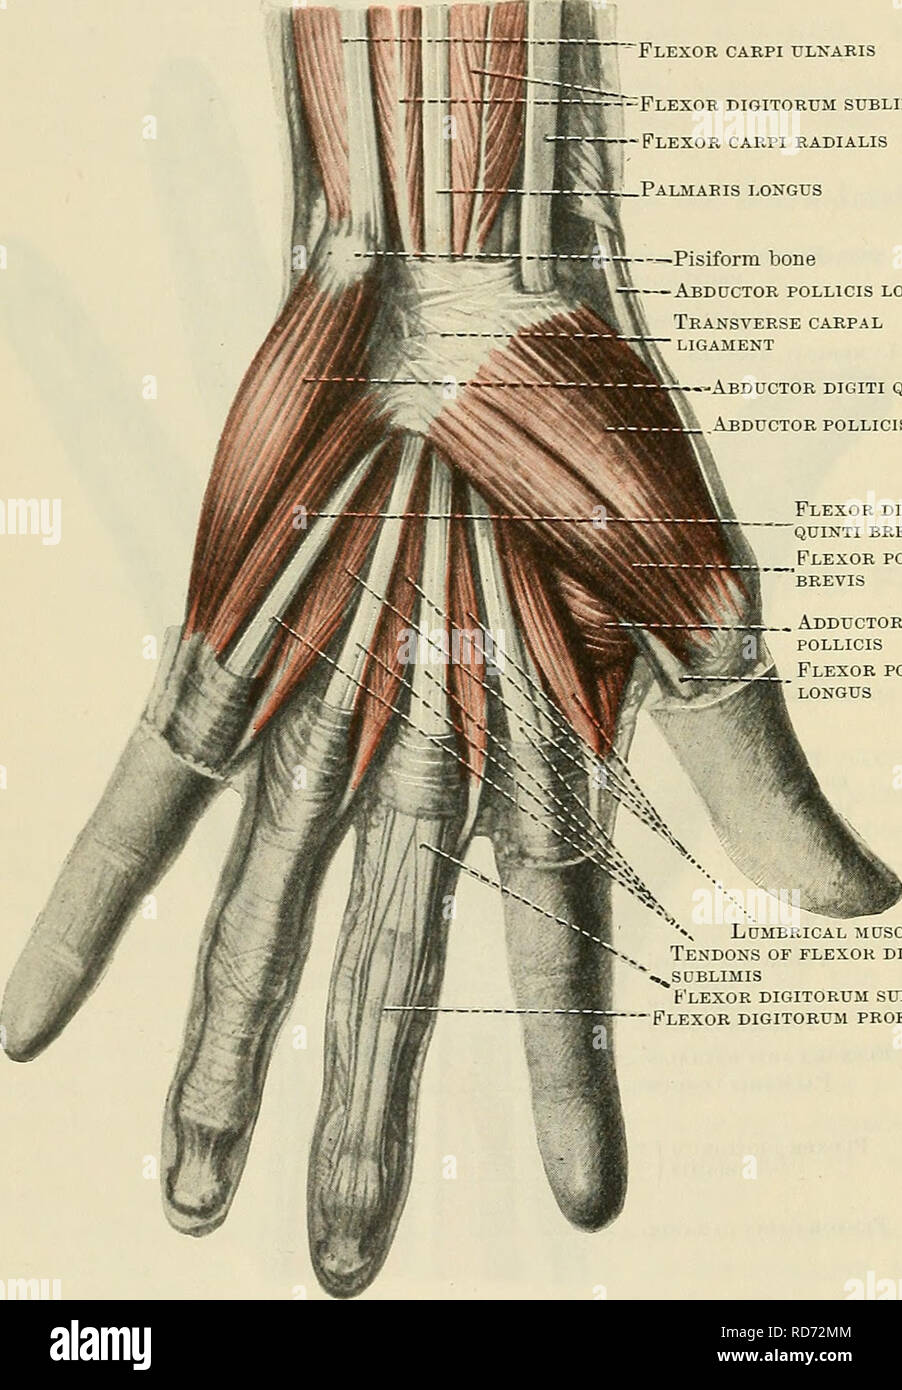 . Cunningham's Text-book of anatomy. Anatomy. 384 THE MUSCULAE SYSTEM. ance. &quot;Flexor carpi ulnaris -&quot;=Flexor digitorum sublimis 1—Flexor carpi radialis Palmar is longus —--Pisiform bone Abductor pollicis longus Transverse carpal ligament -Abductor digiti quinti Abductor pollicis brevis Flexor digiti quinti brevis Flexor pollicis 'brevis Adductor pollicis Flexor pollicis longus radiales longus and brevis, (3) Extensor pollicis longus, (4) Extensor digitorum communis and extensor indicis proprius, (5) Extensor digiti quinti propnus, (6) Extensor carpi ulnaris. The thin deep fascia of t Stock Photo